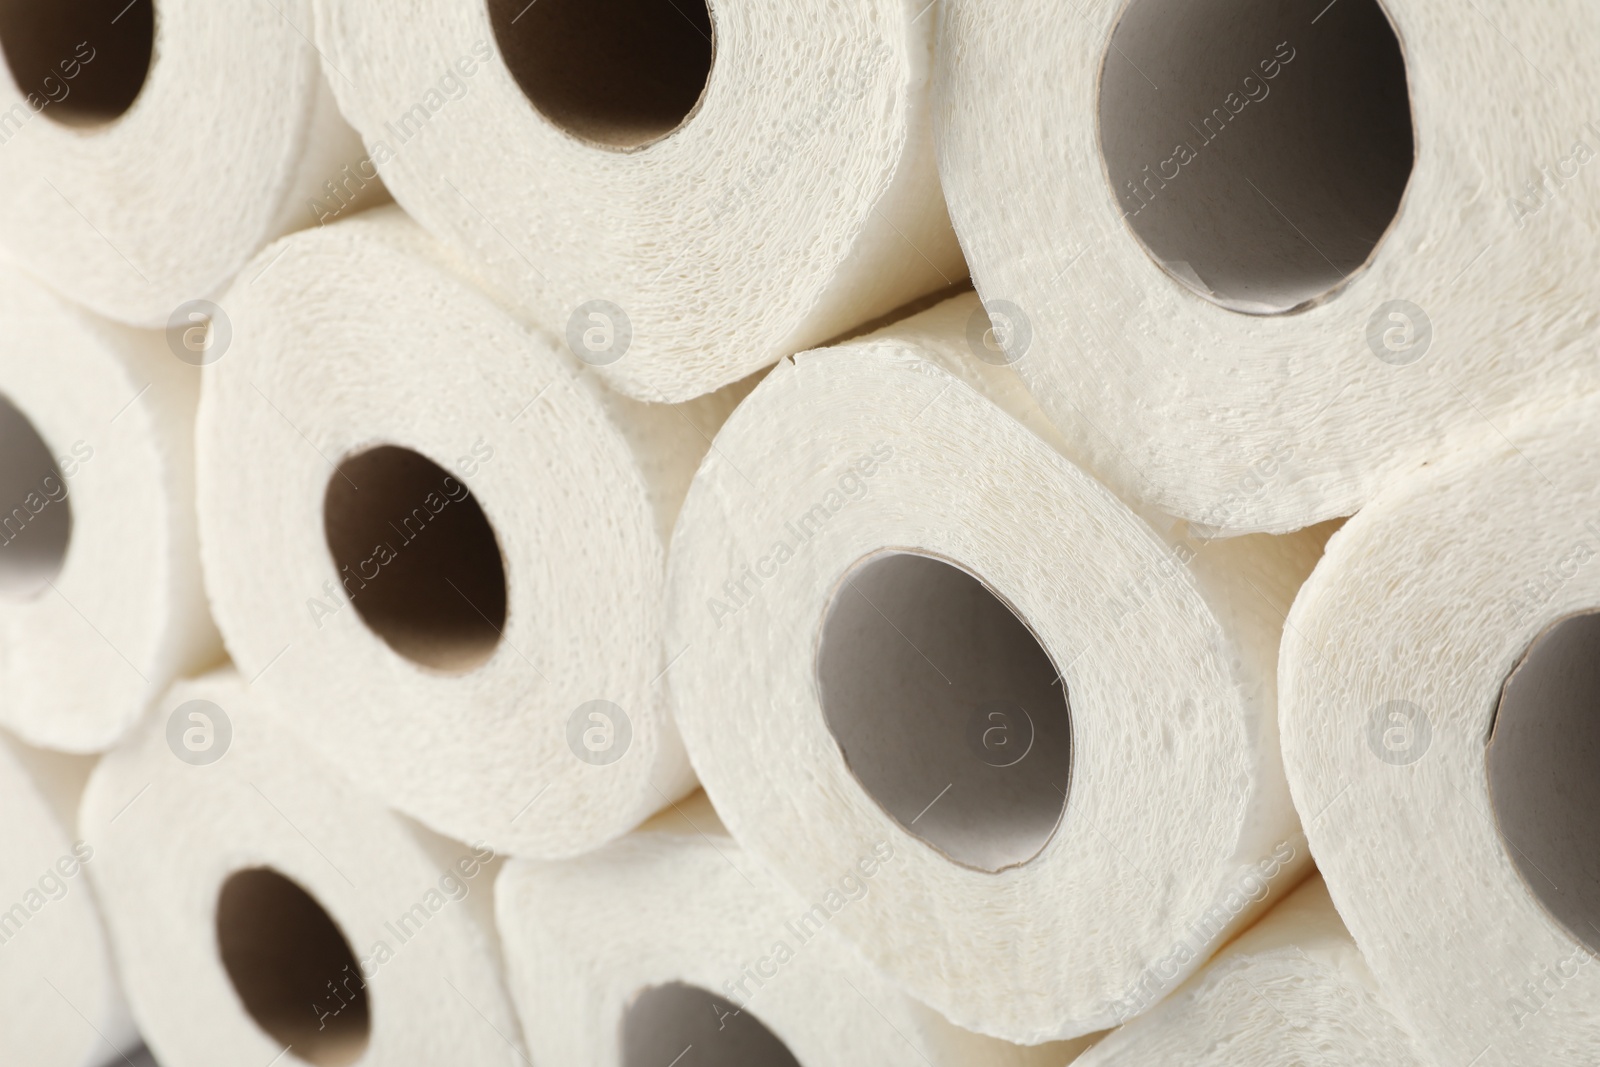 Photo of Rolls of paper towels as background, closeup view